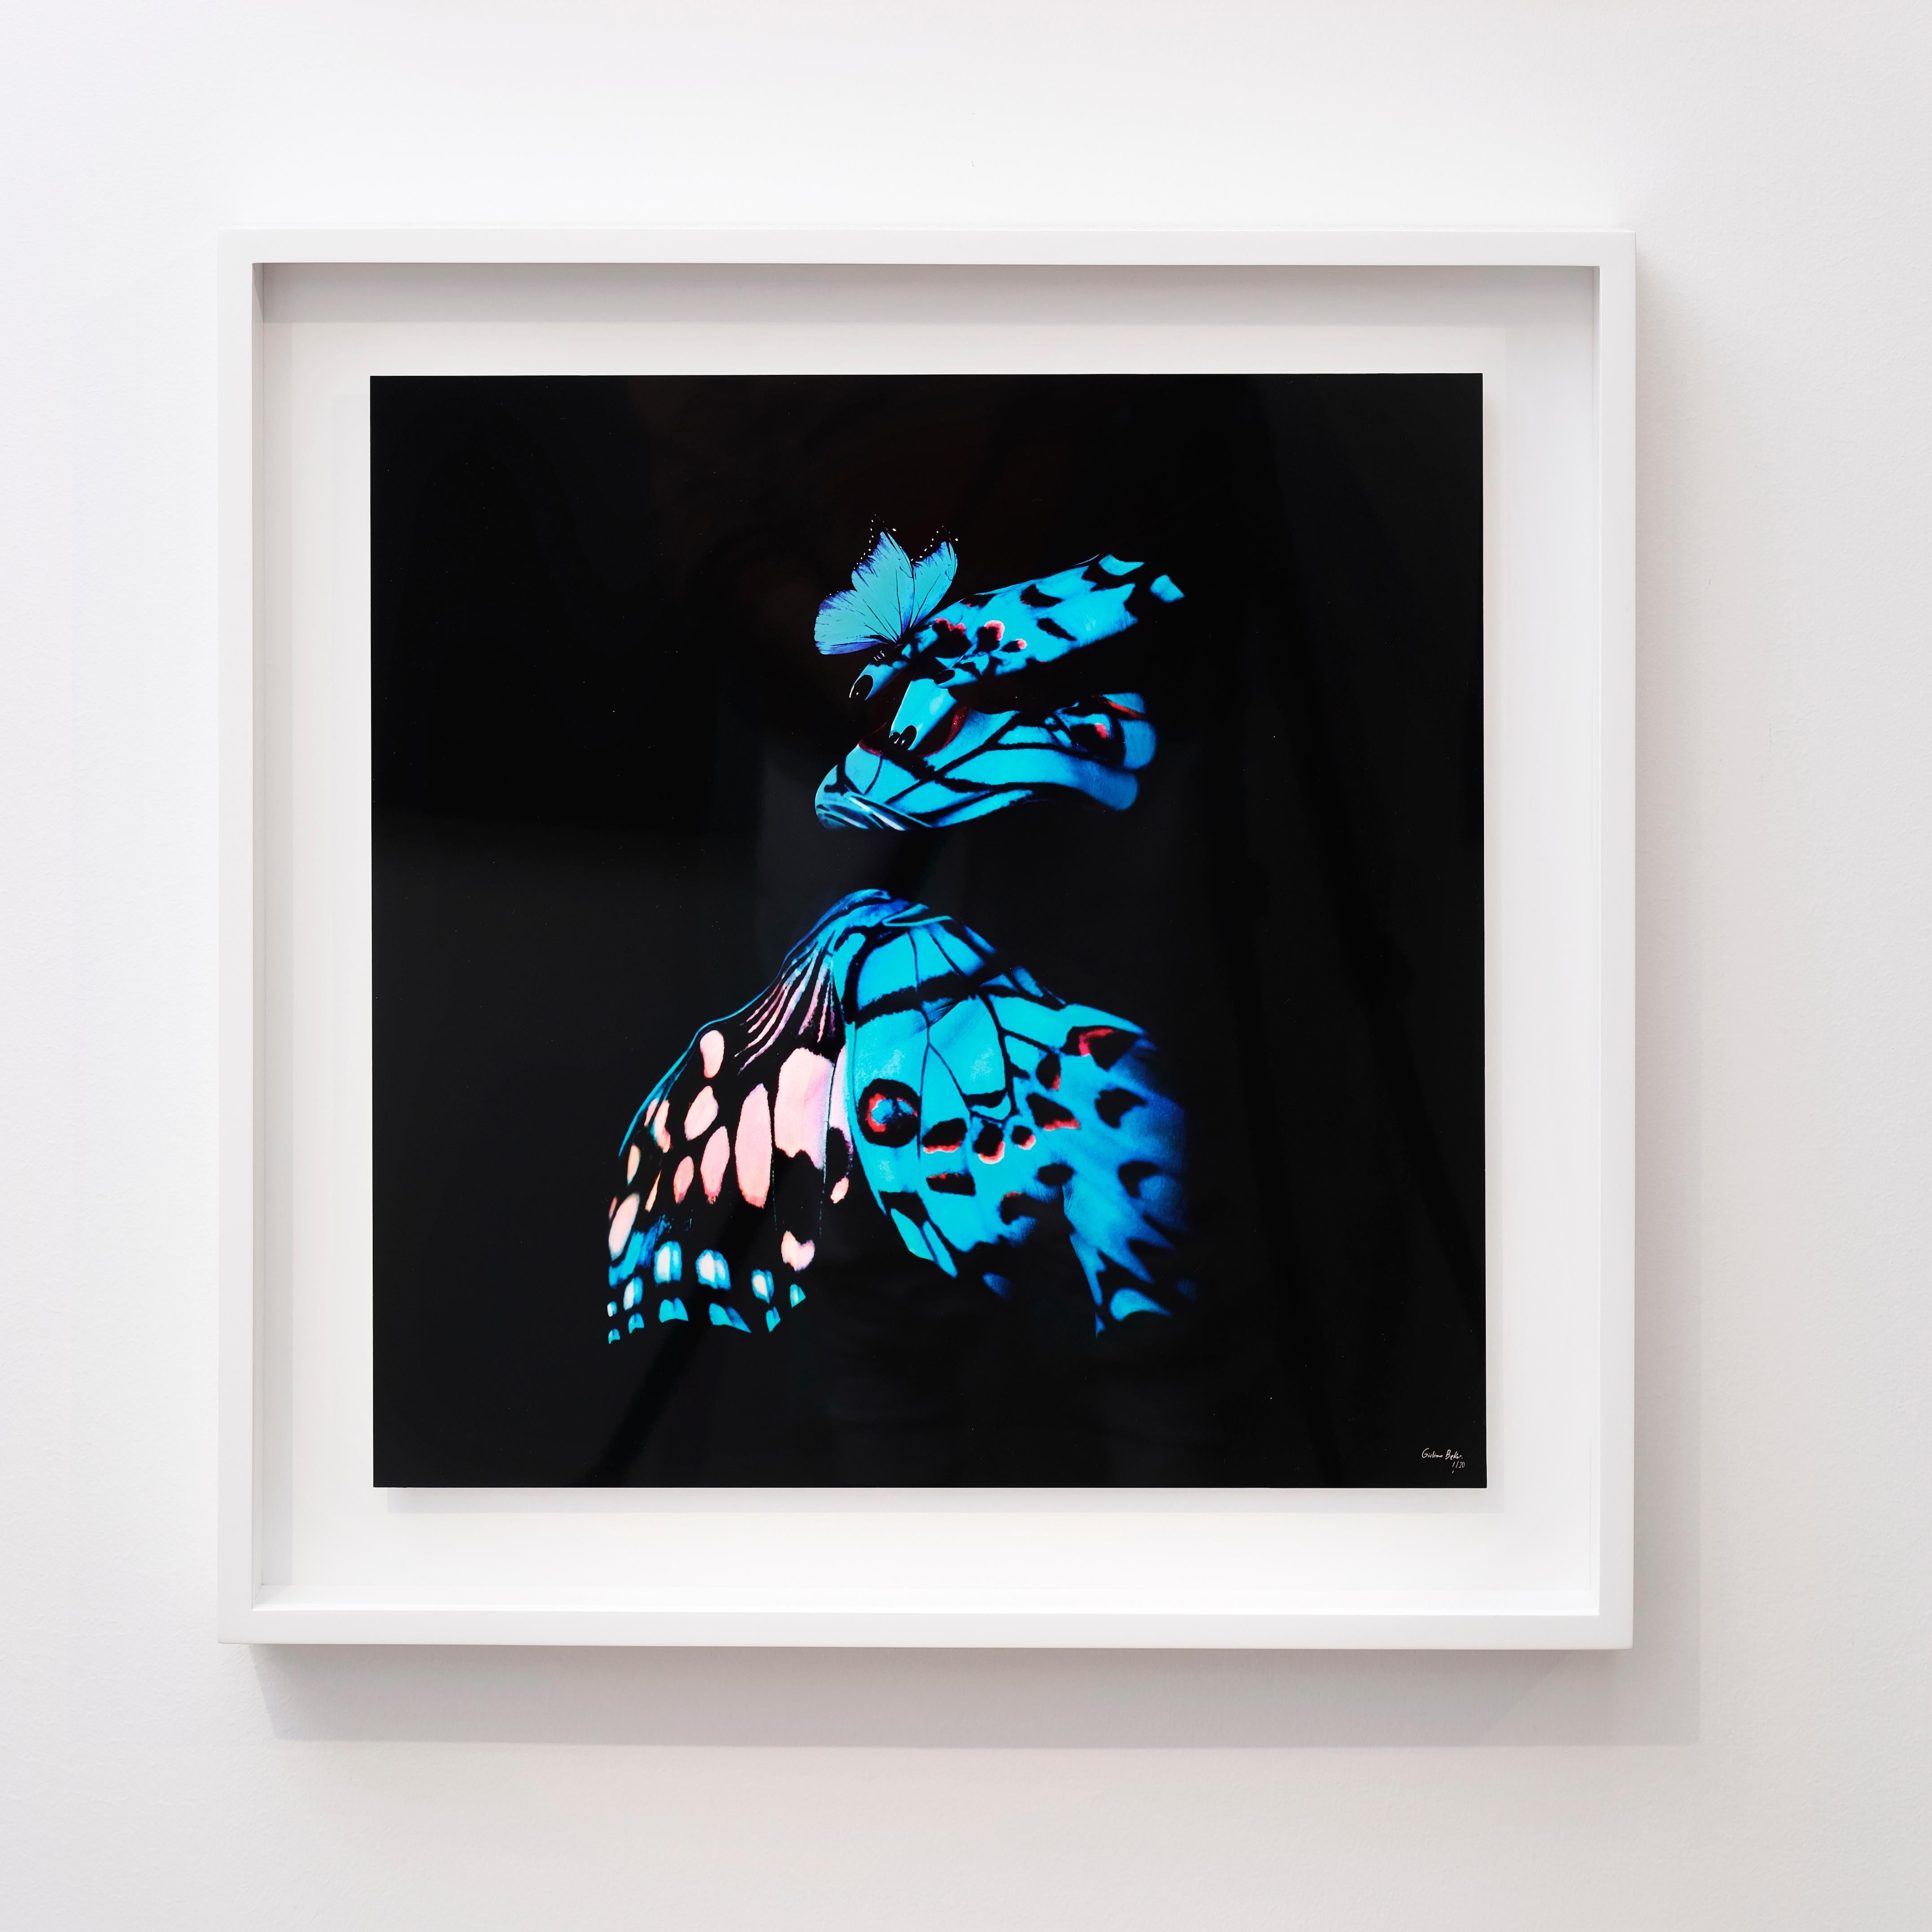 "Butterfly 14" (FRAMED) Photography 16" x 16" in Edition 1/20 by Giuliano Bekor

Title: Butterfly B12
Year: 2018
Print size: 16" x 16" Inch
Framed size: 20" x 20" Inch 
Edition: 1/20
Artist proof: 2

Medium:  
Archival fine art Fujiflex print on